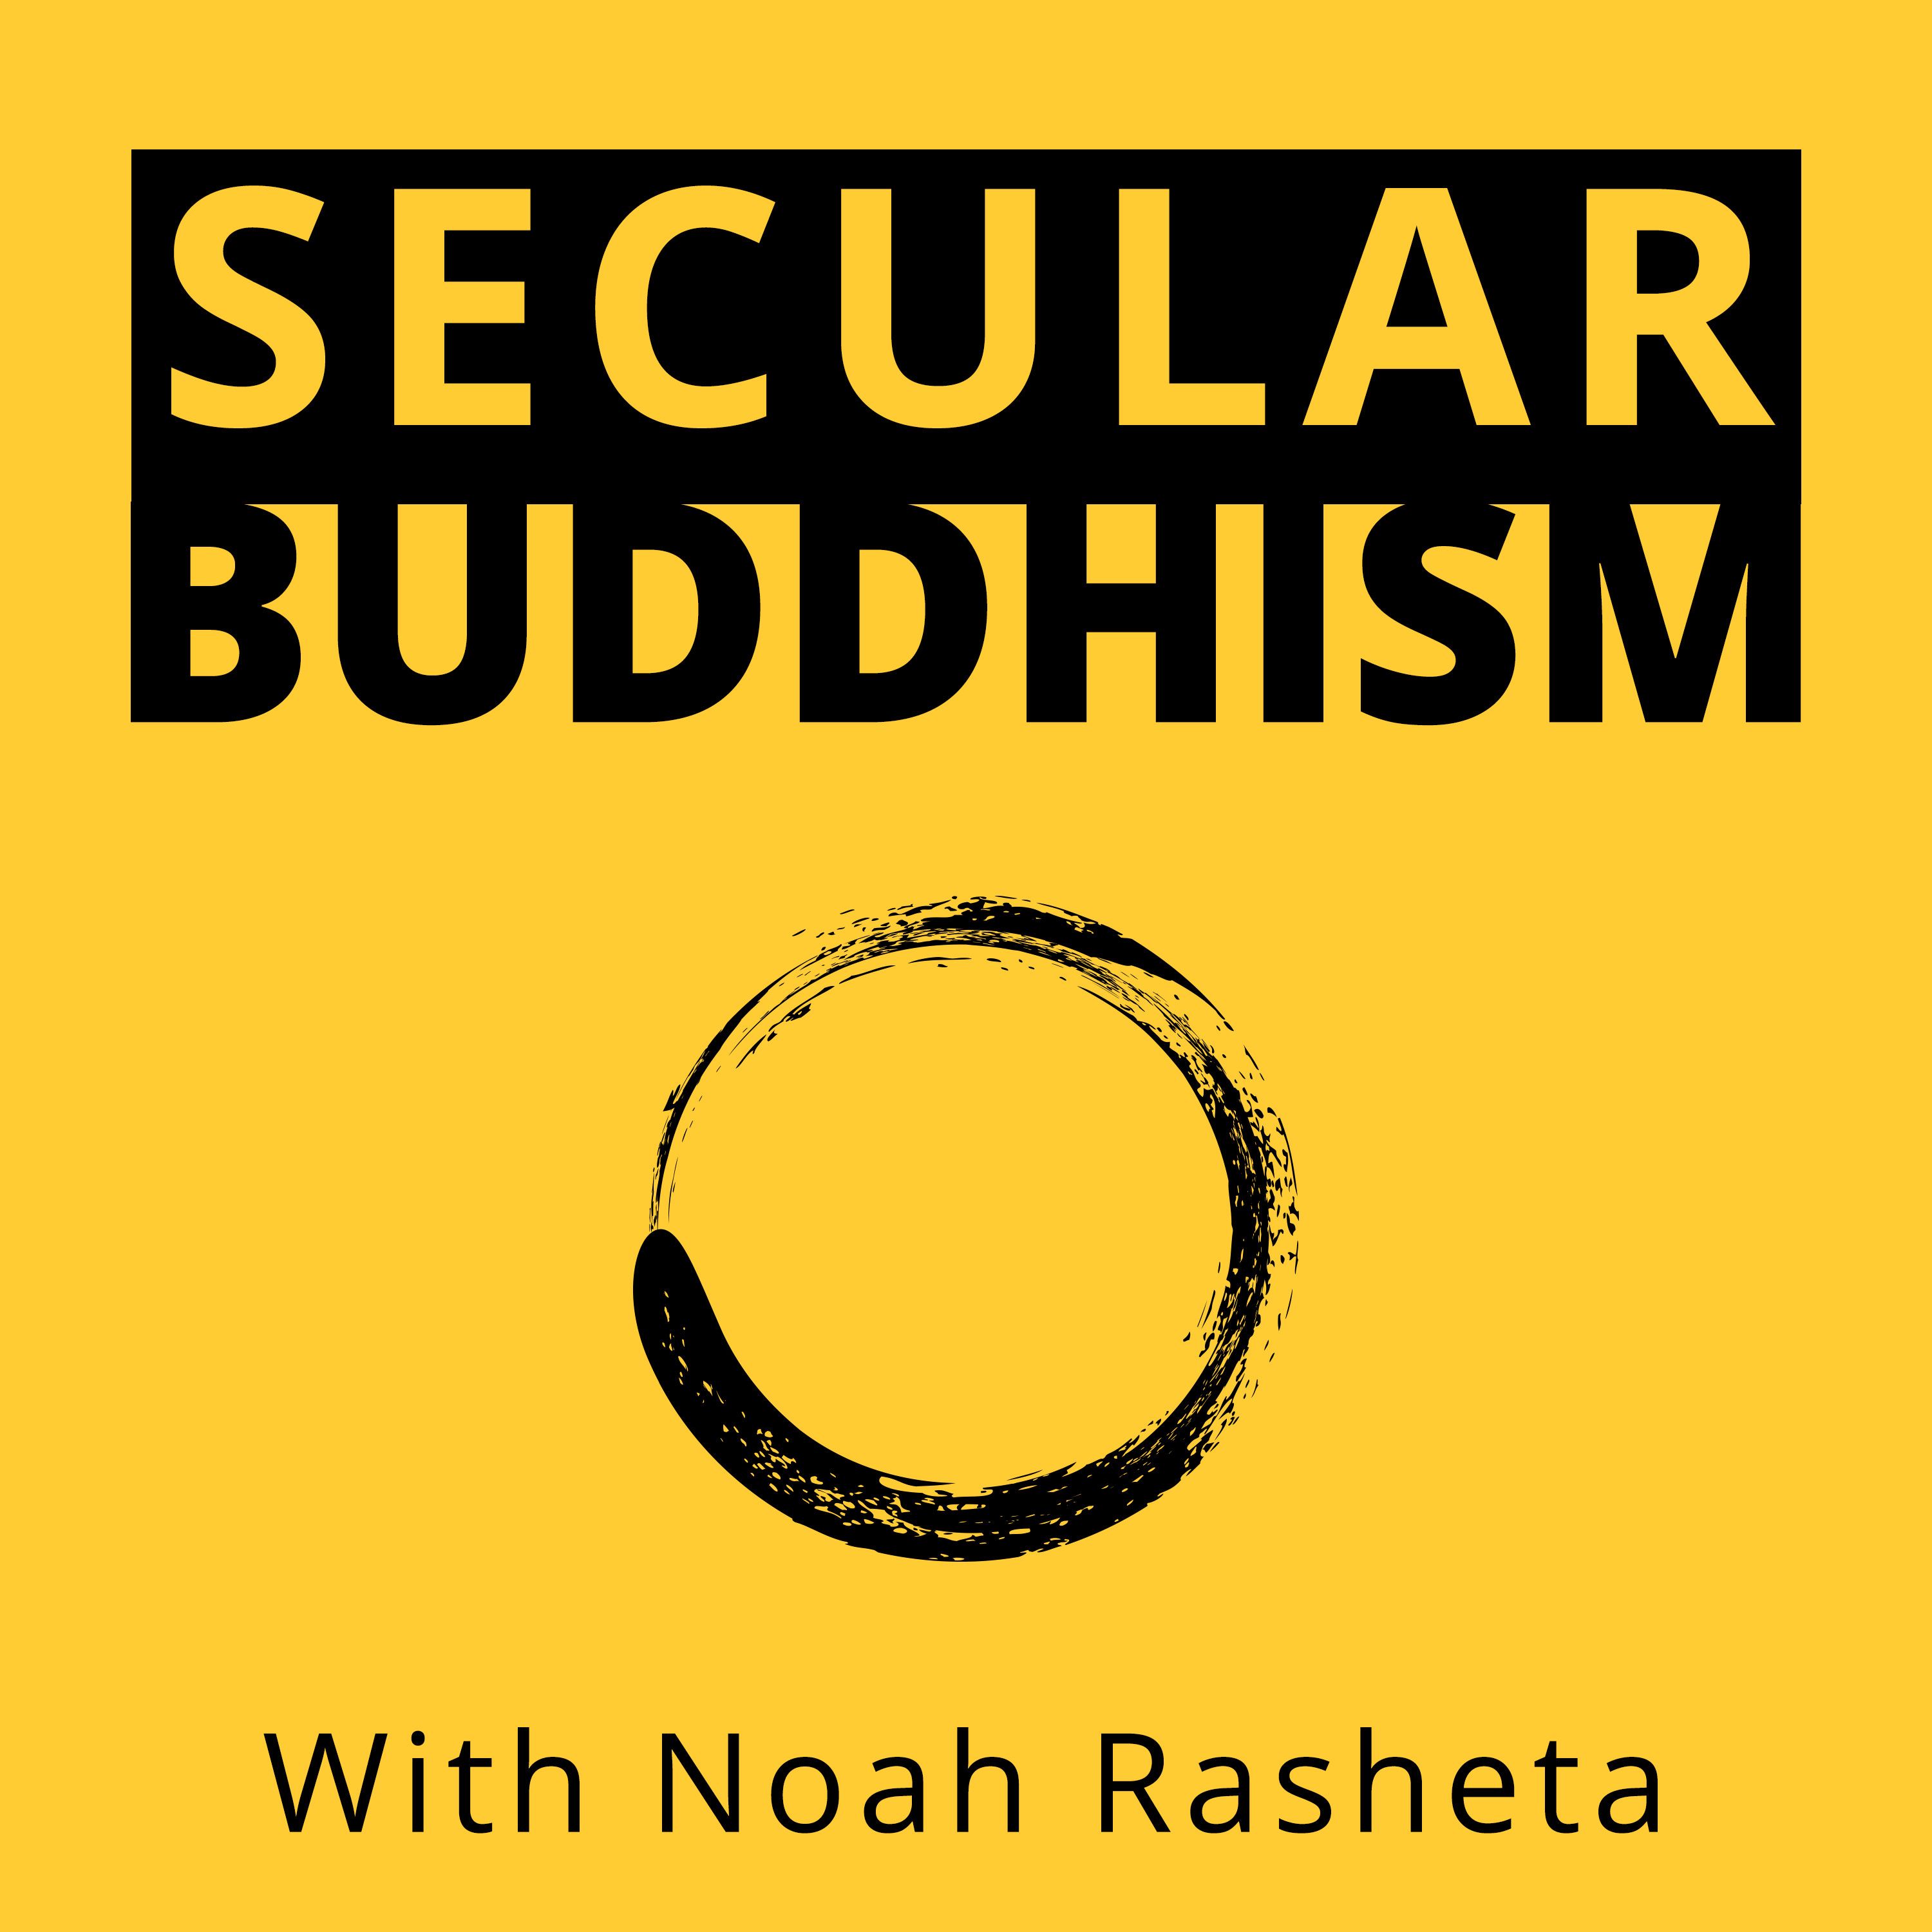 1 - What Is Secular Buddhism?